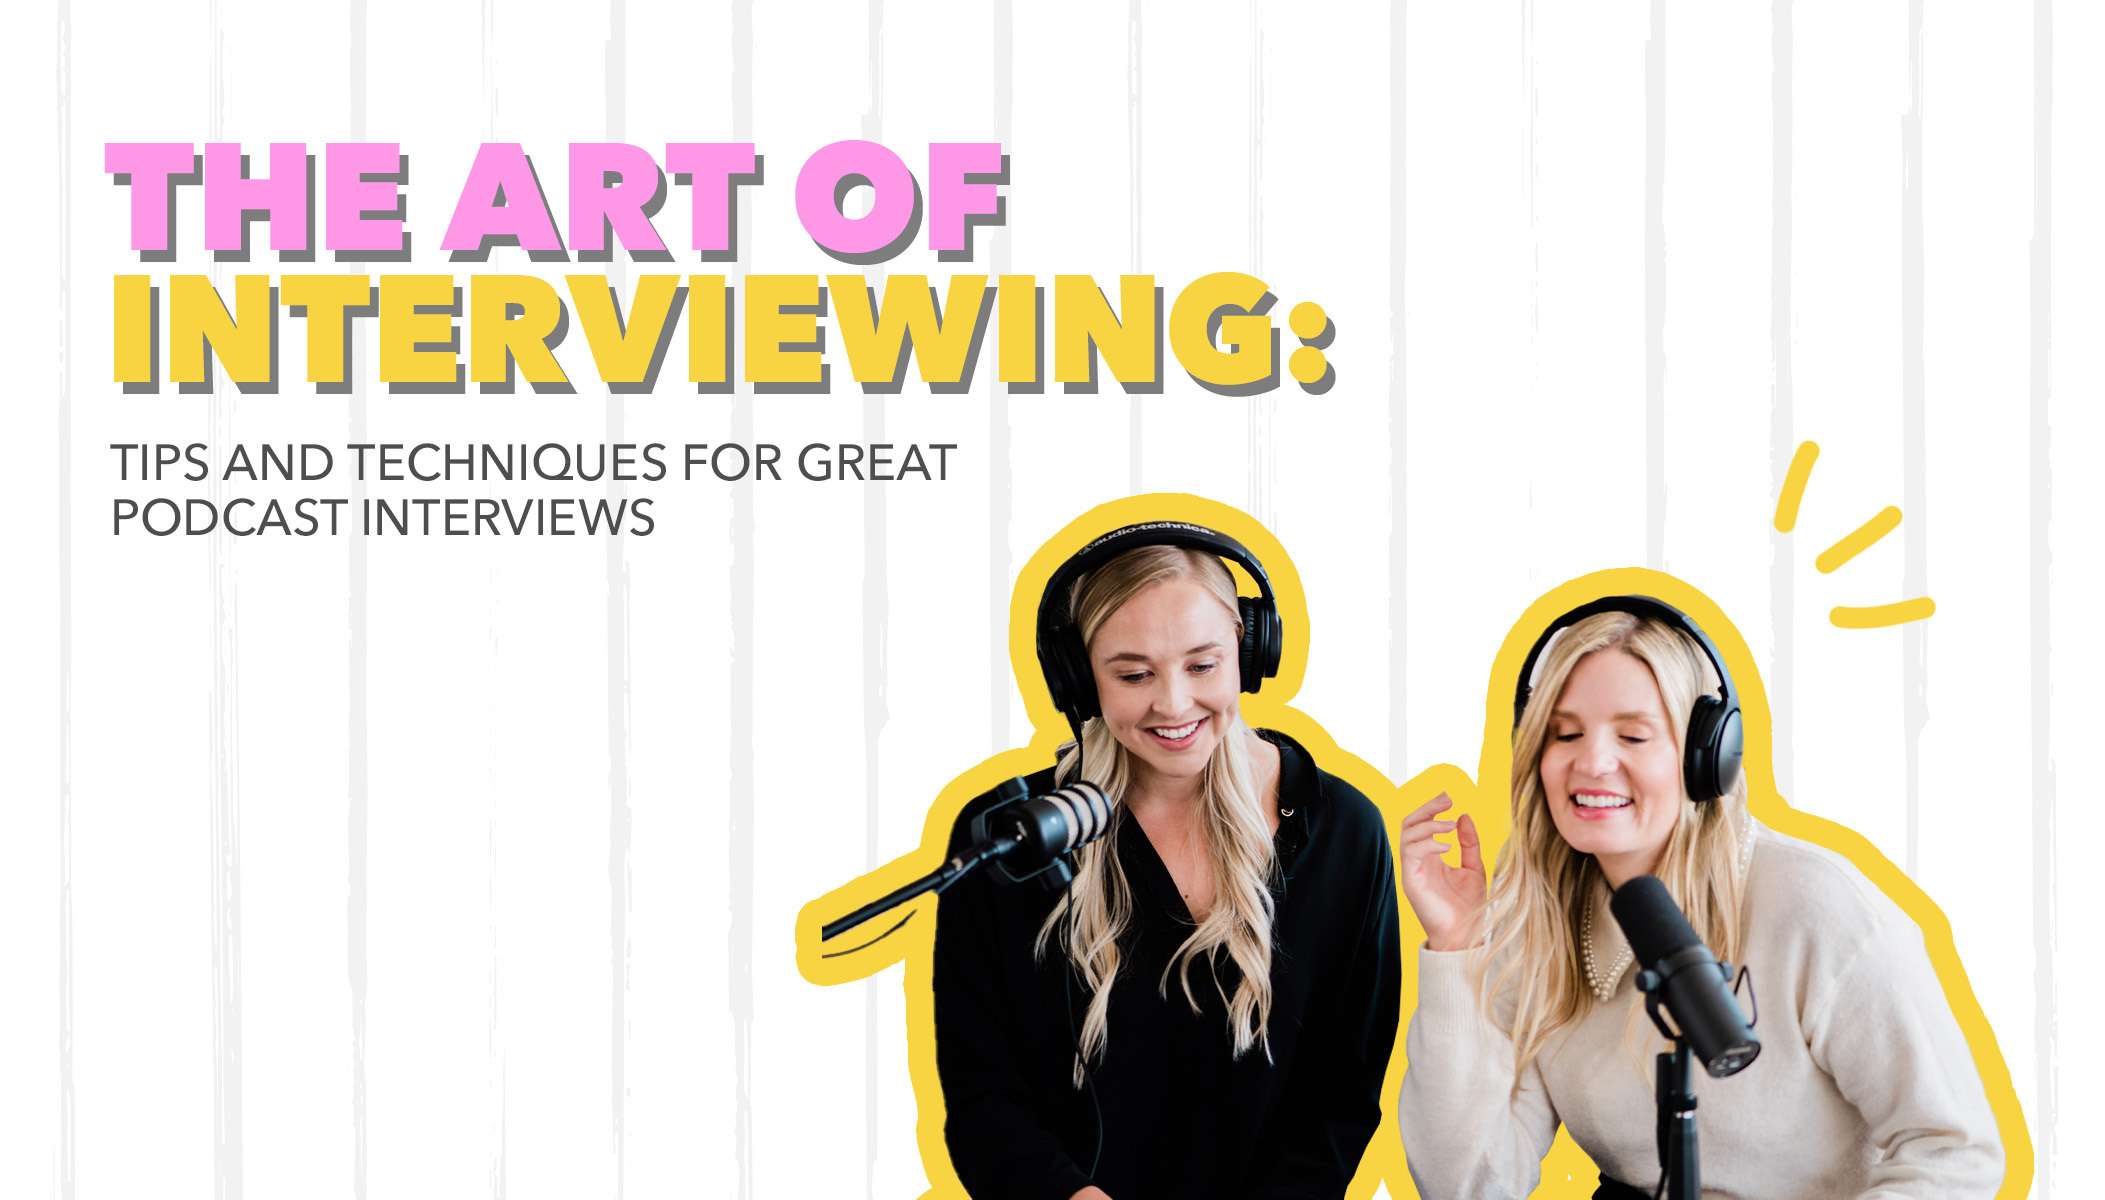 The art of interviewing: tips and techniques for great podcast interviews